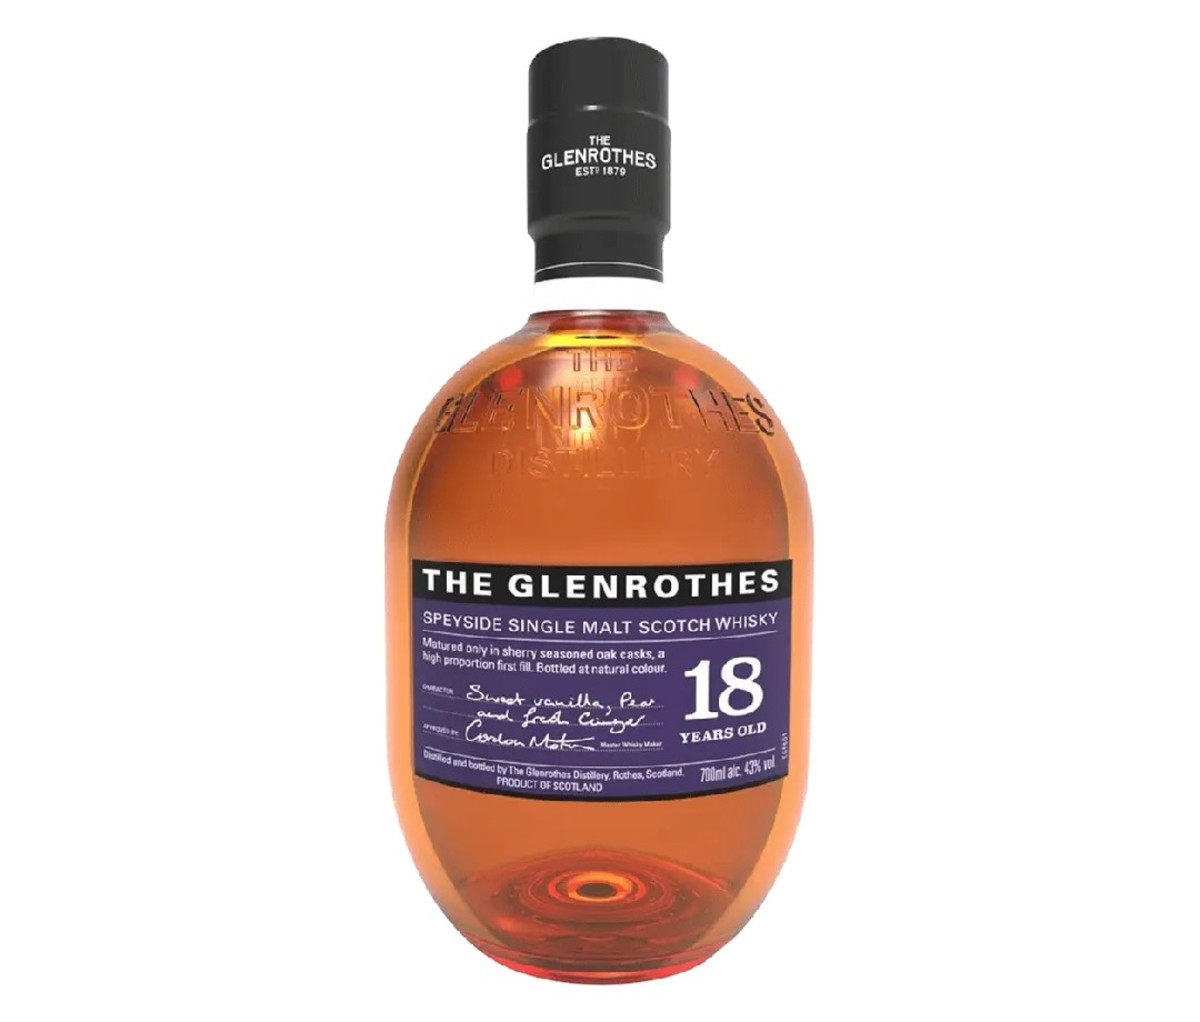 Bottle of The Glenrothes 18 whisky